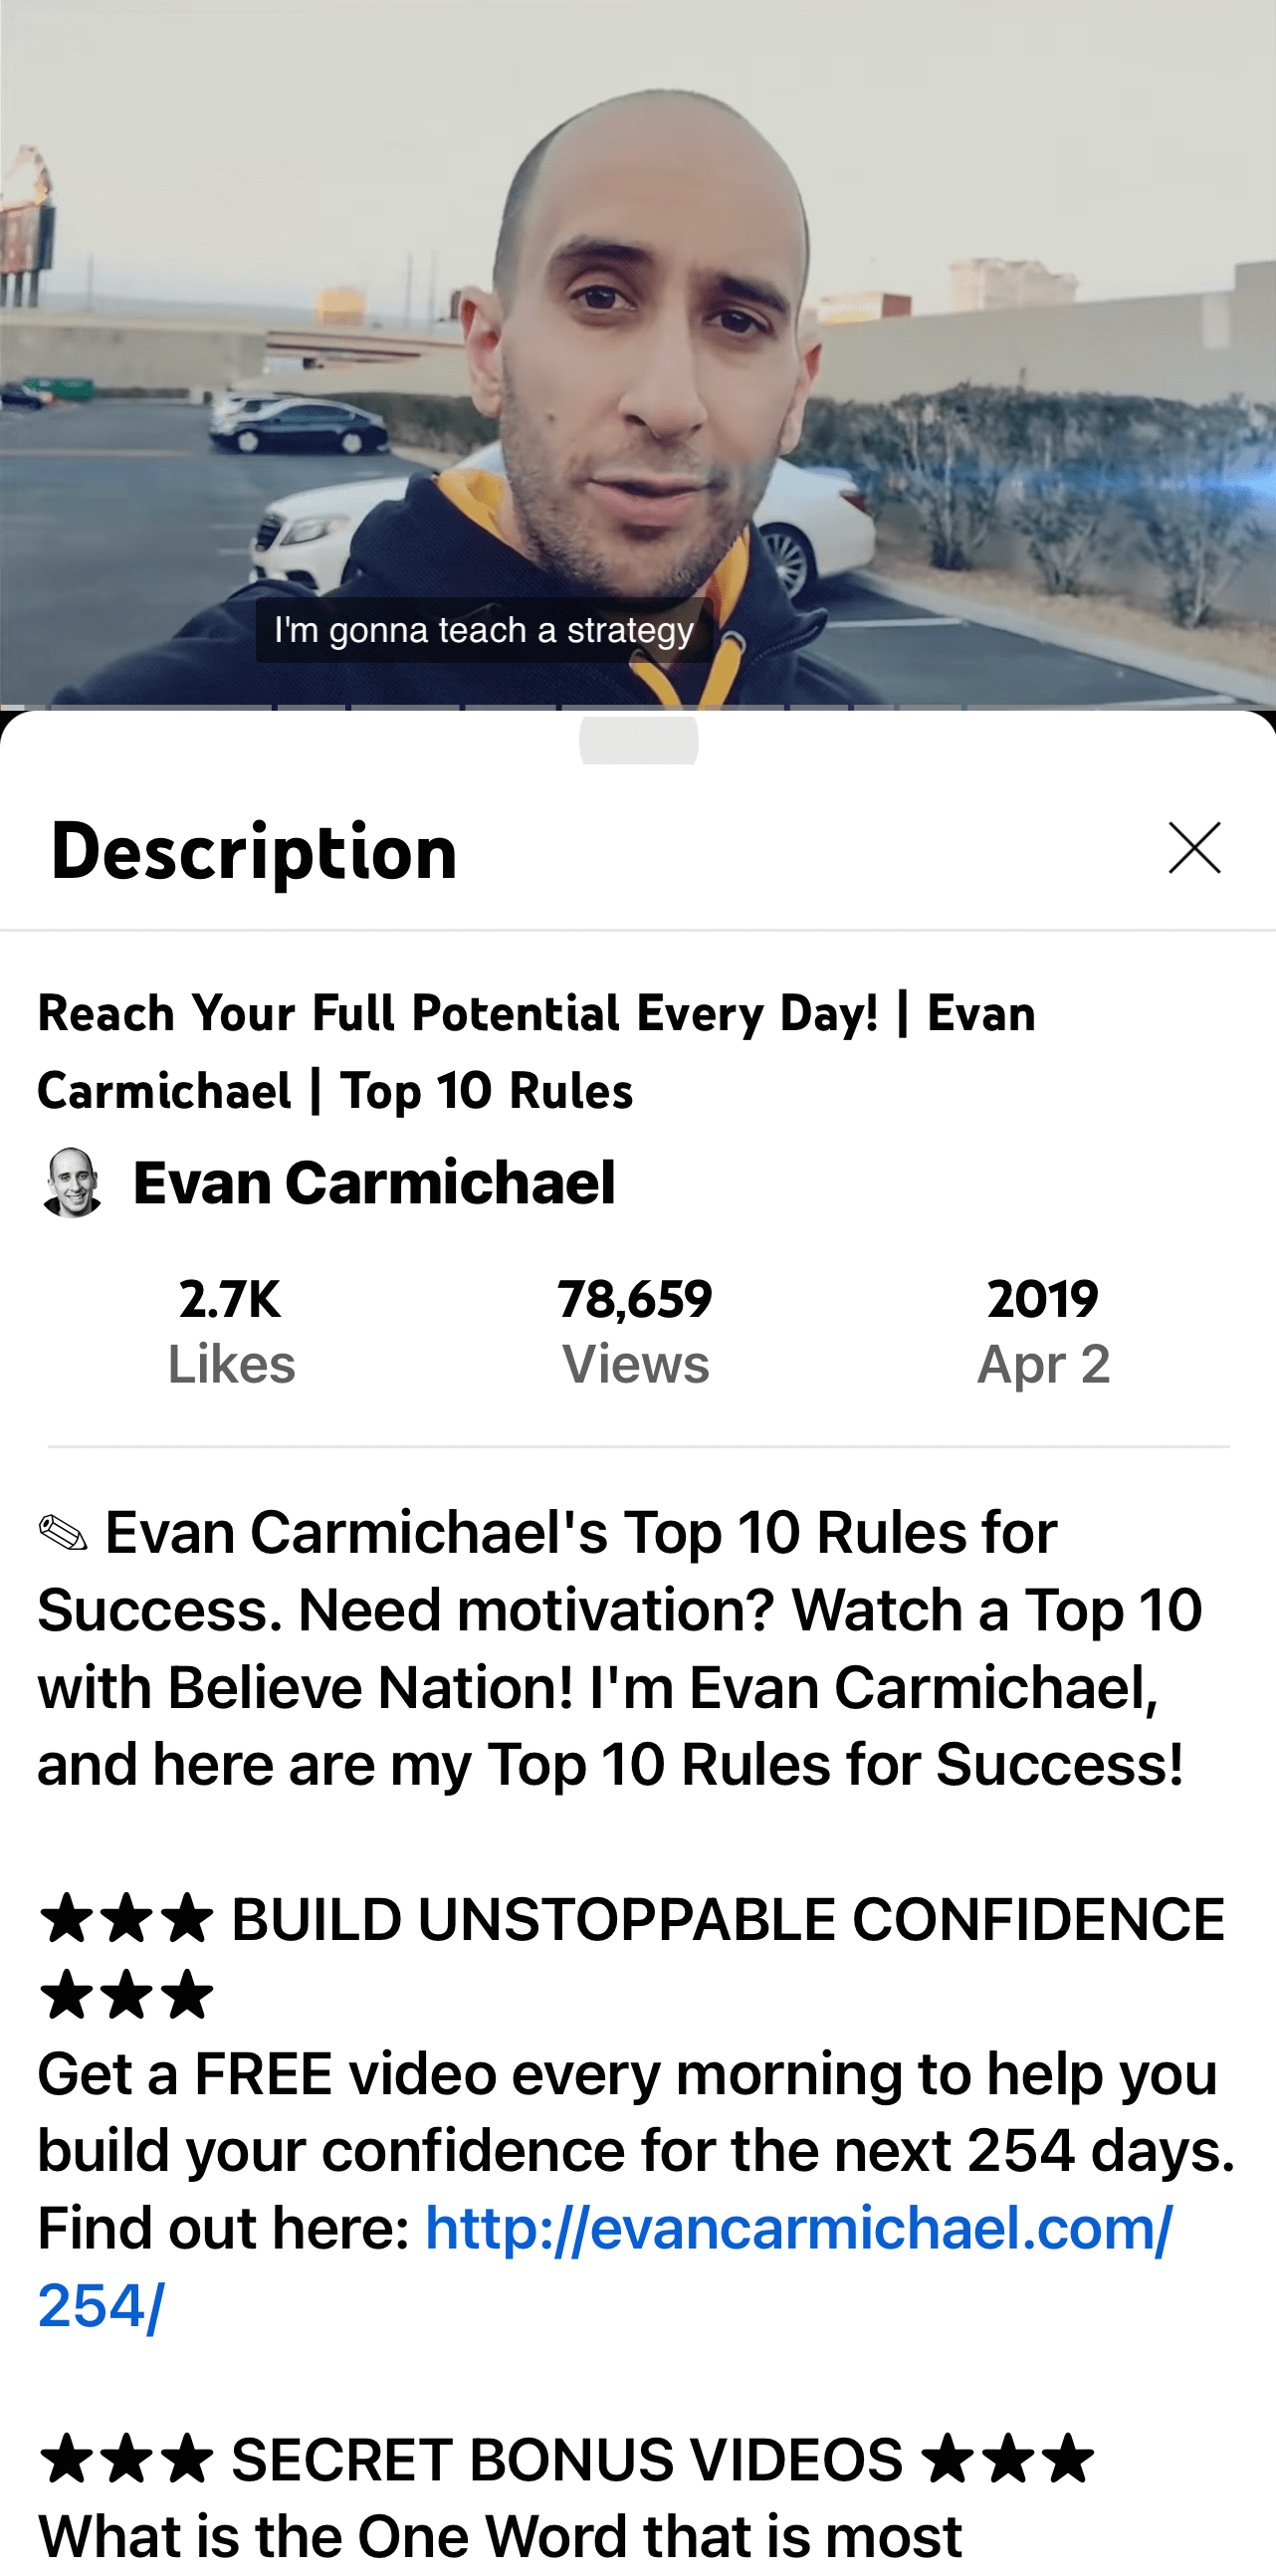 image of Evan Carmichael YouTube video and description on mobile app